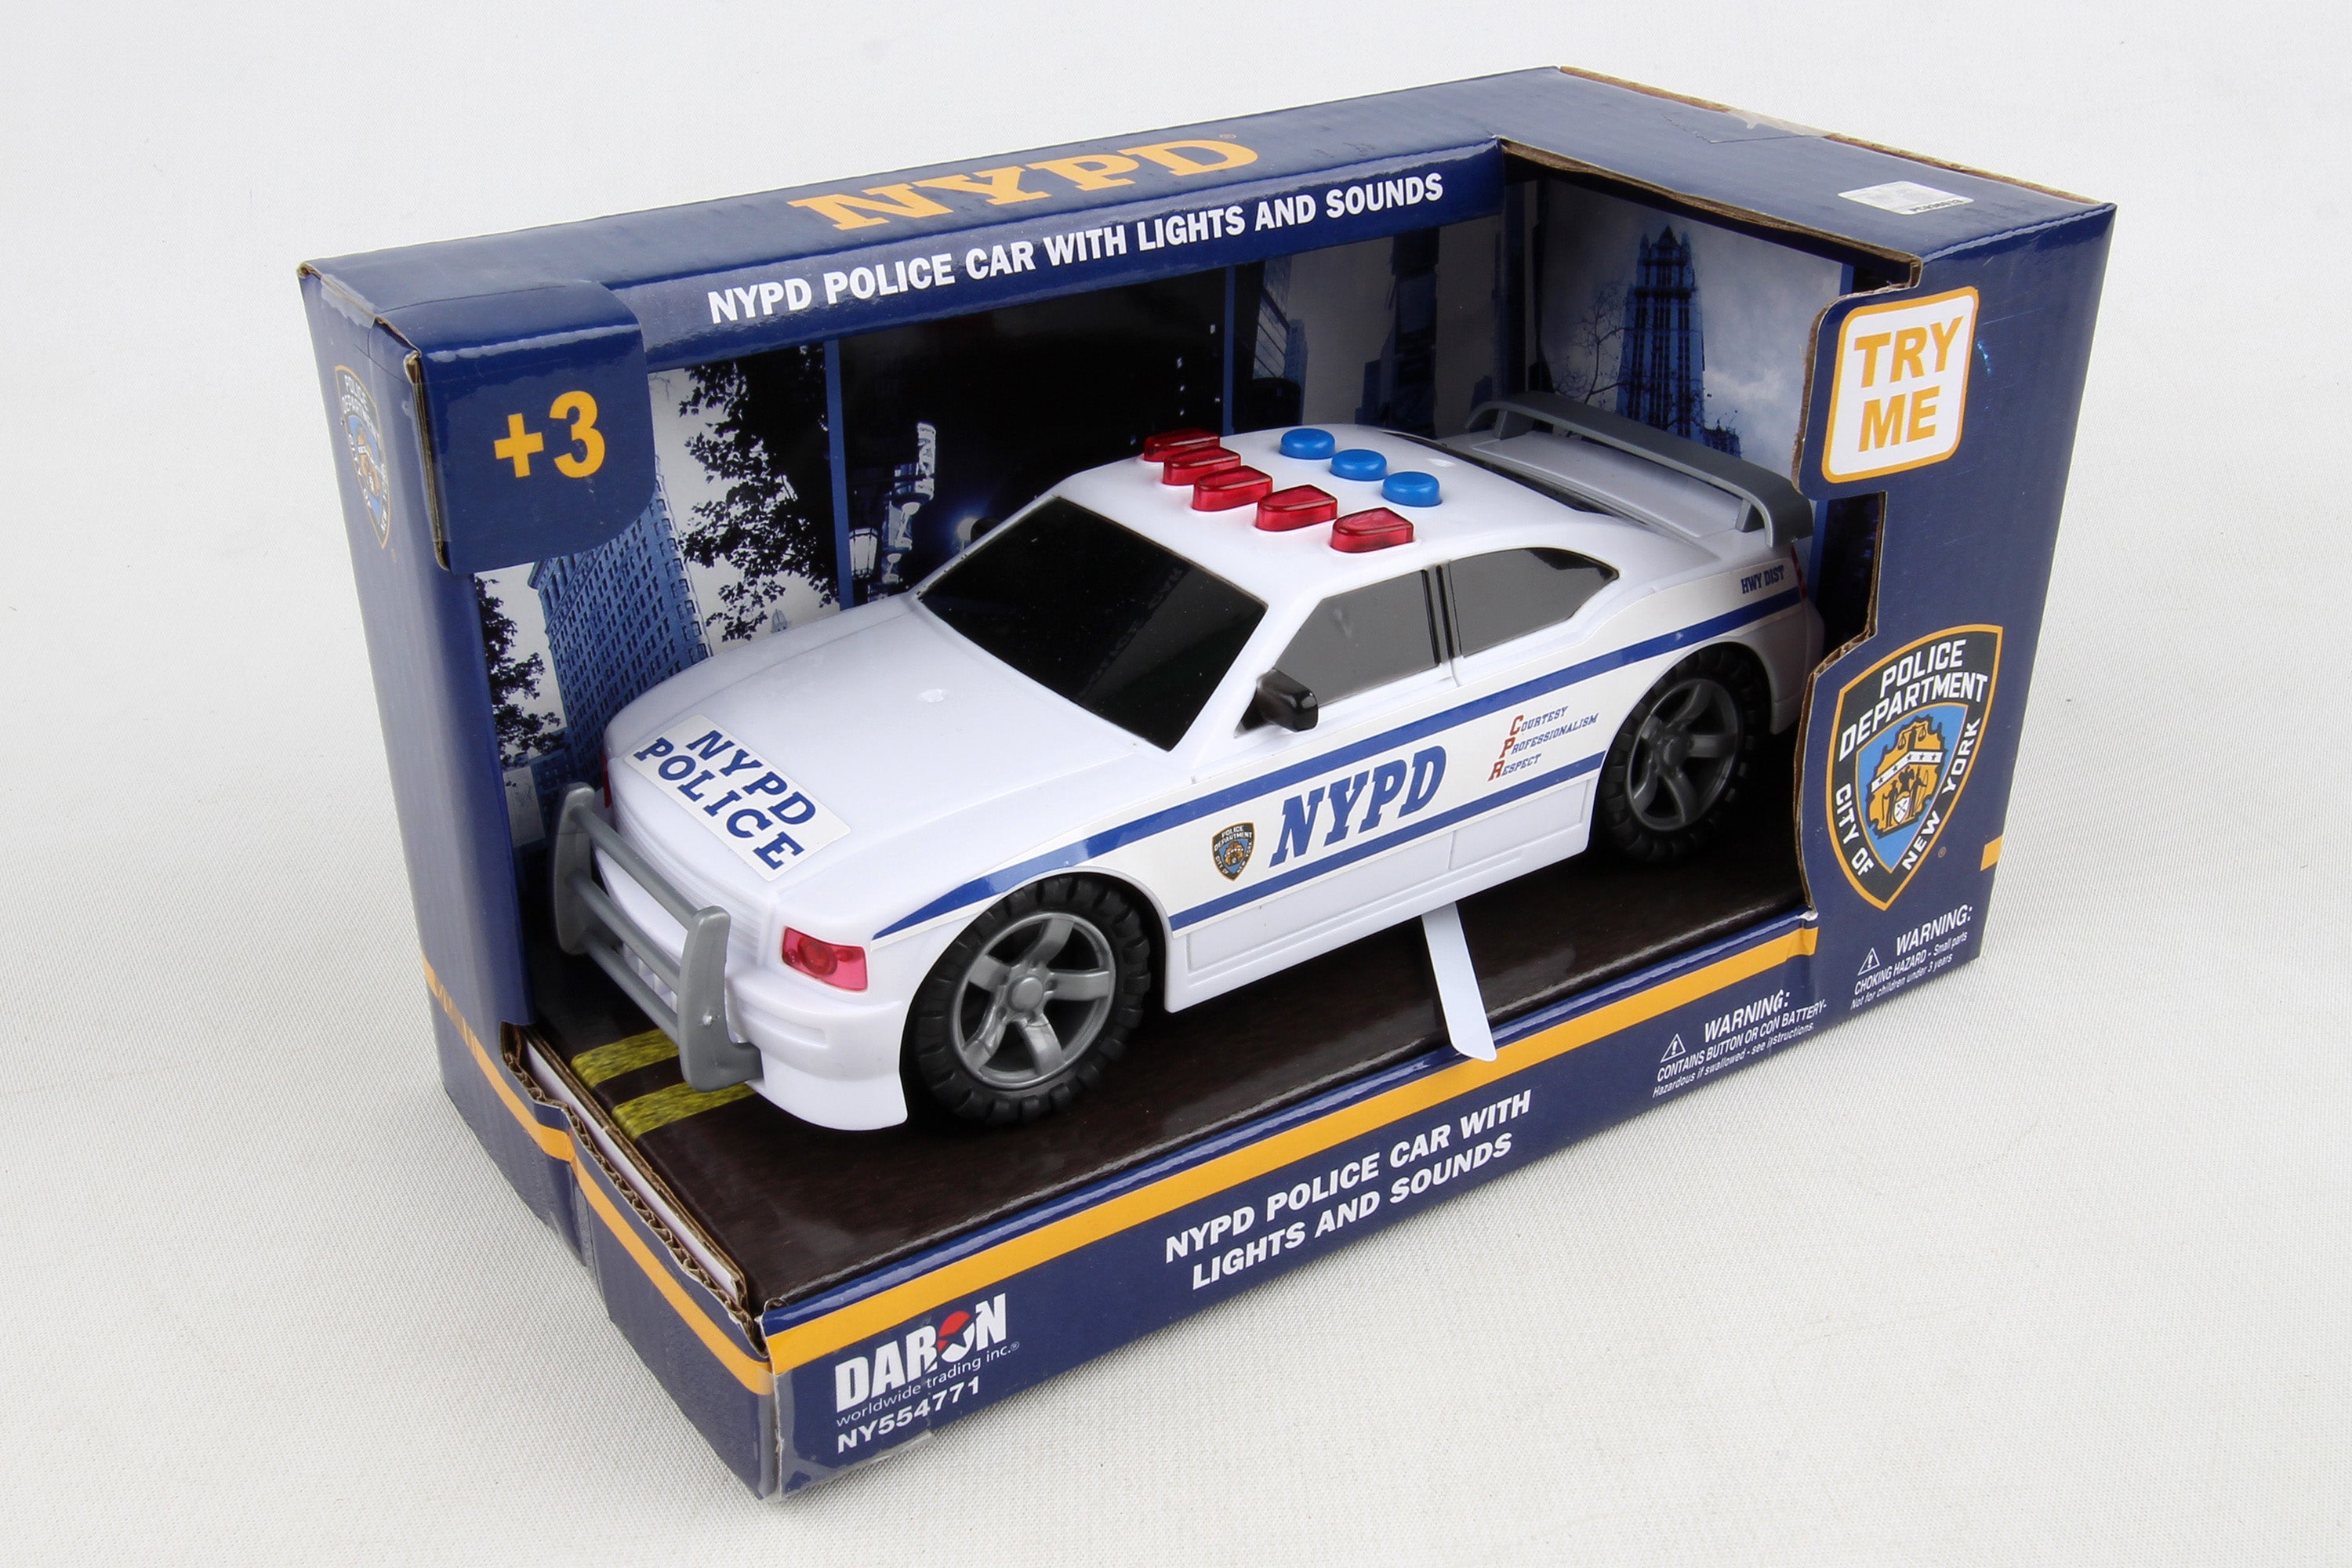 Toy Police Suv